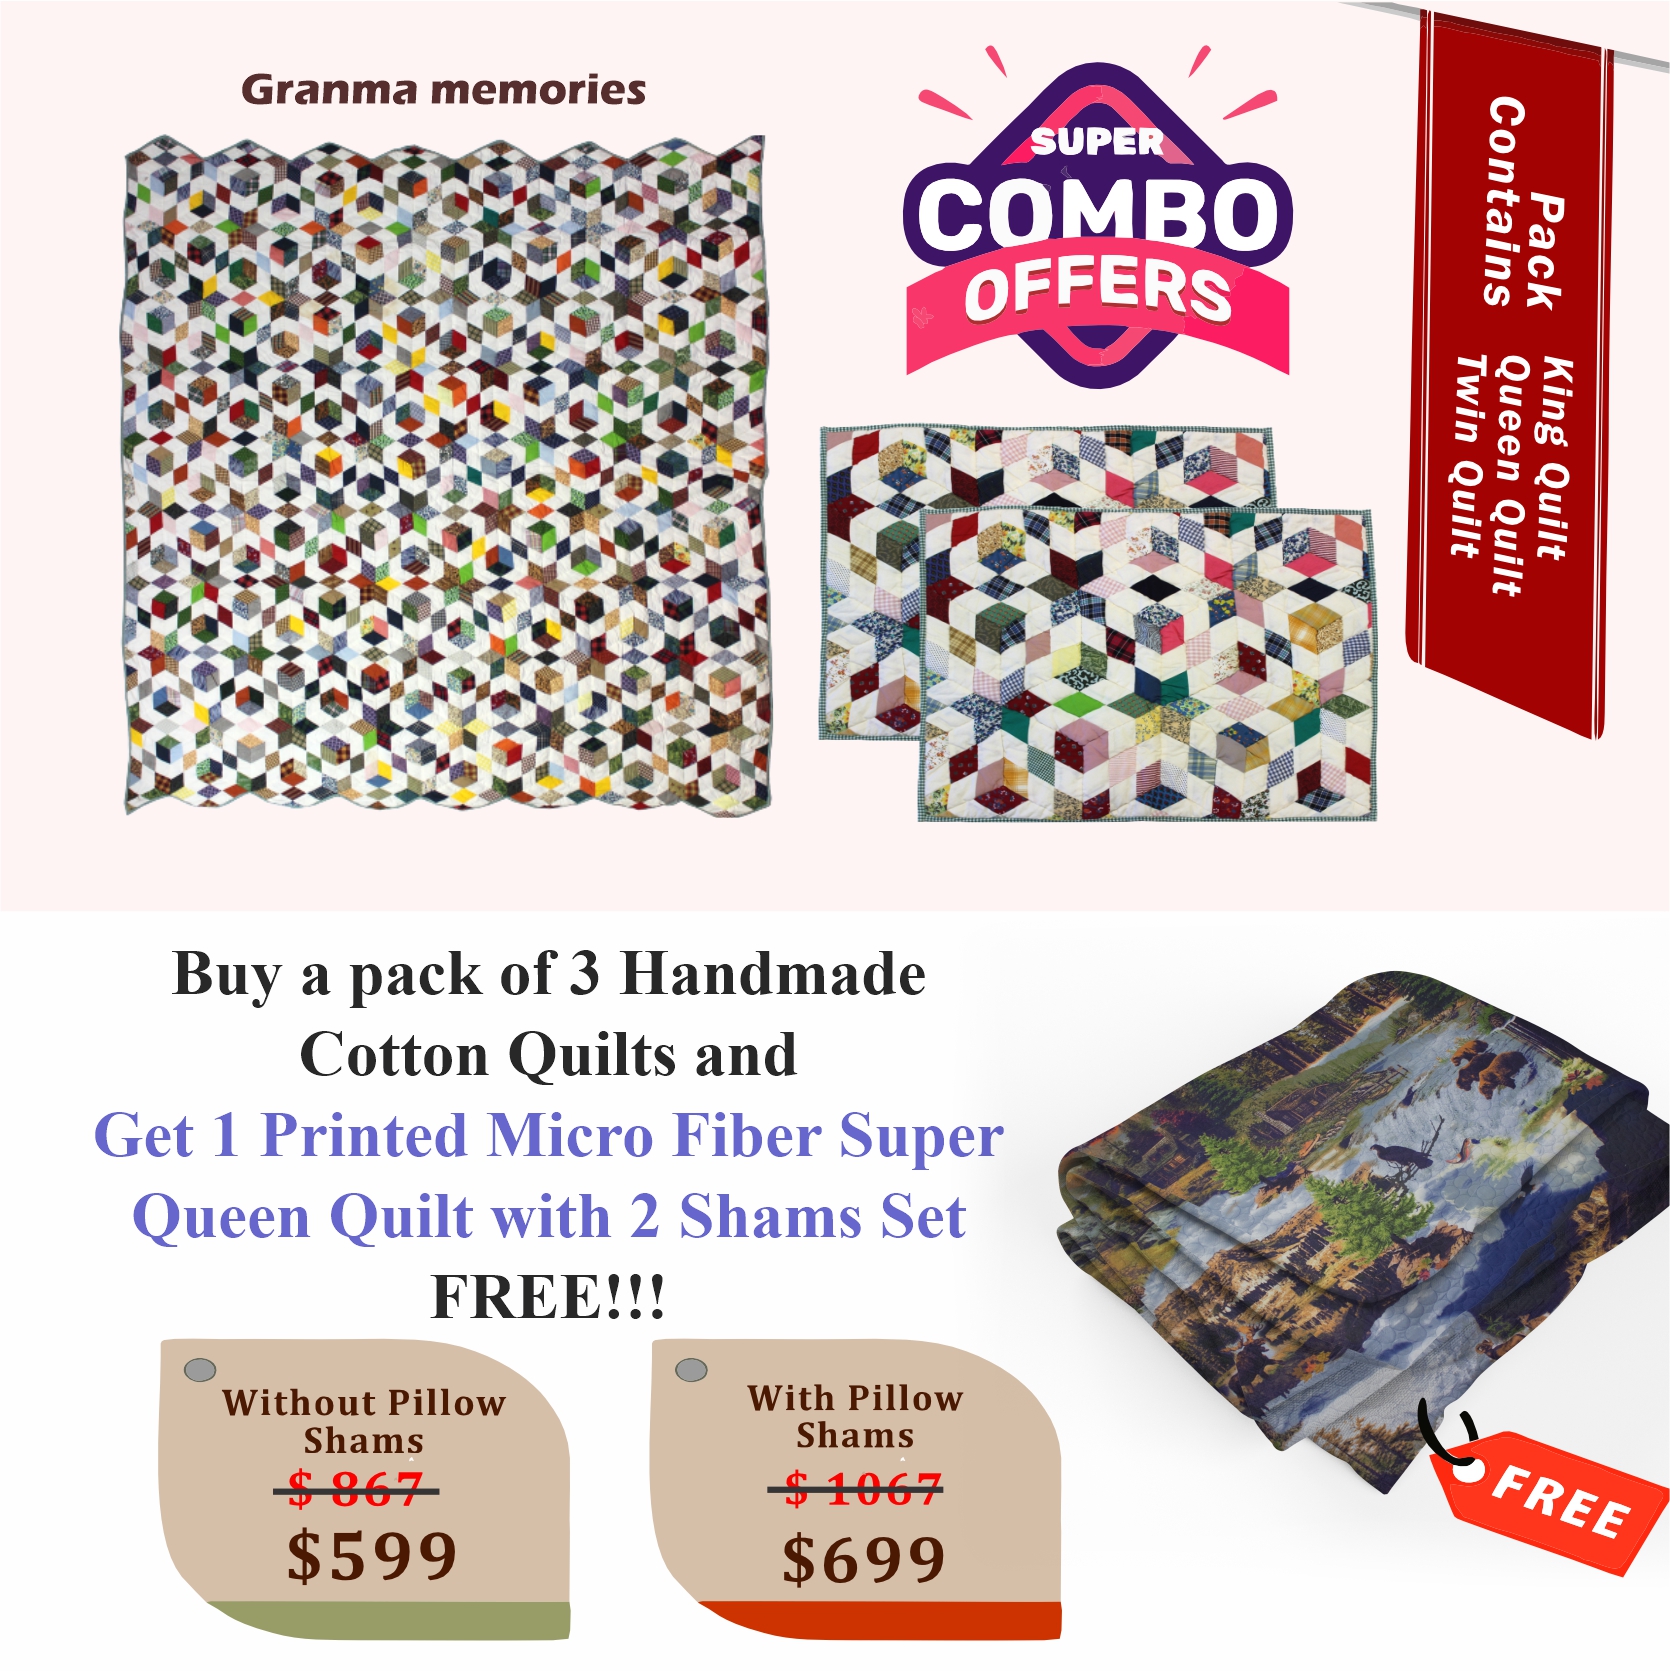 Granma Memory - Handmade Cotton quilts | Buy 3 cotton quilts and get 1 Printed Microfiber Super Queen Quilt with 2 Shams set FREE